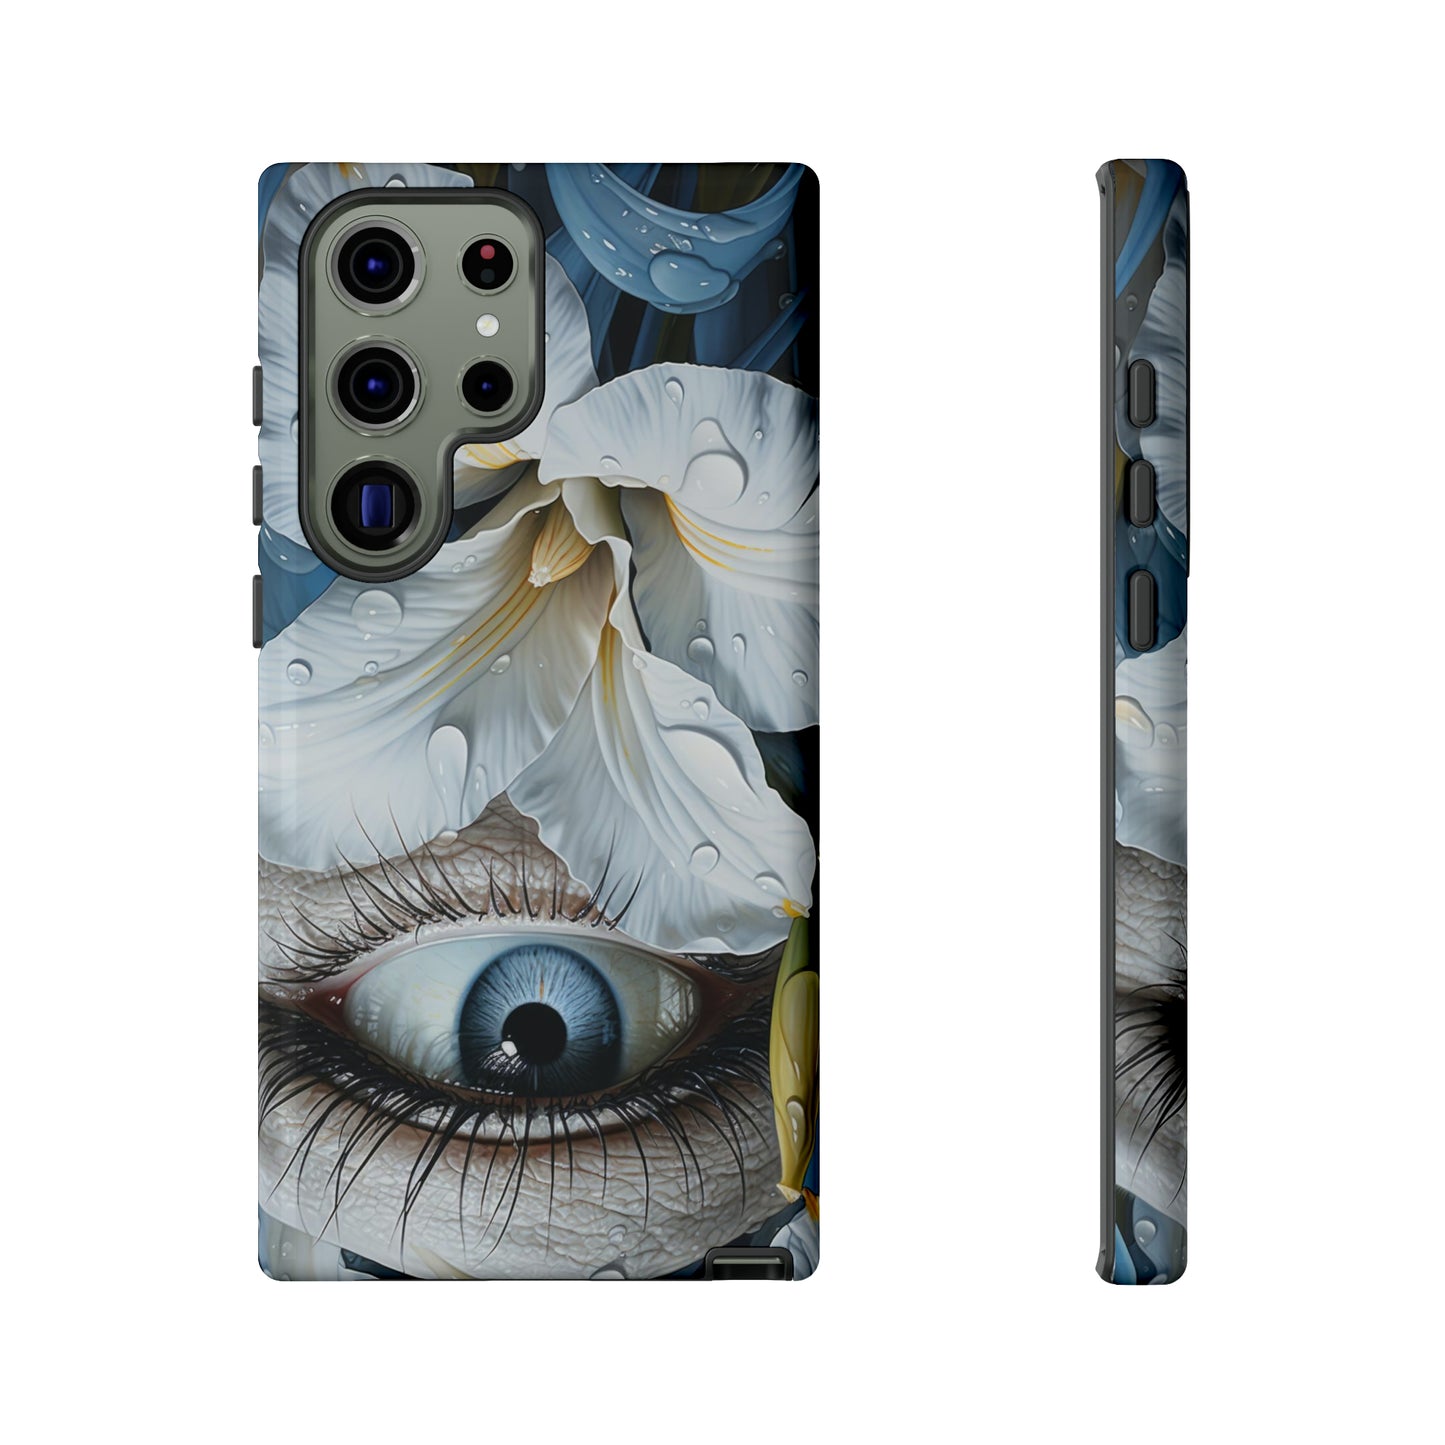 Blue Eye's Gaze In White Petal Mystery Protective Phone Case - Entrancing Design for iPhone, Samsung, Pixel